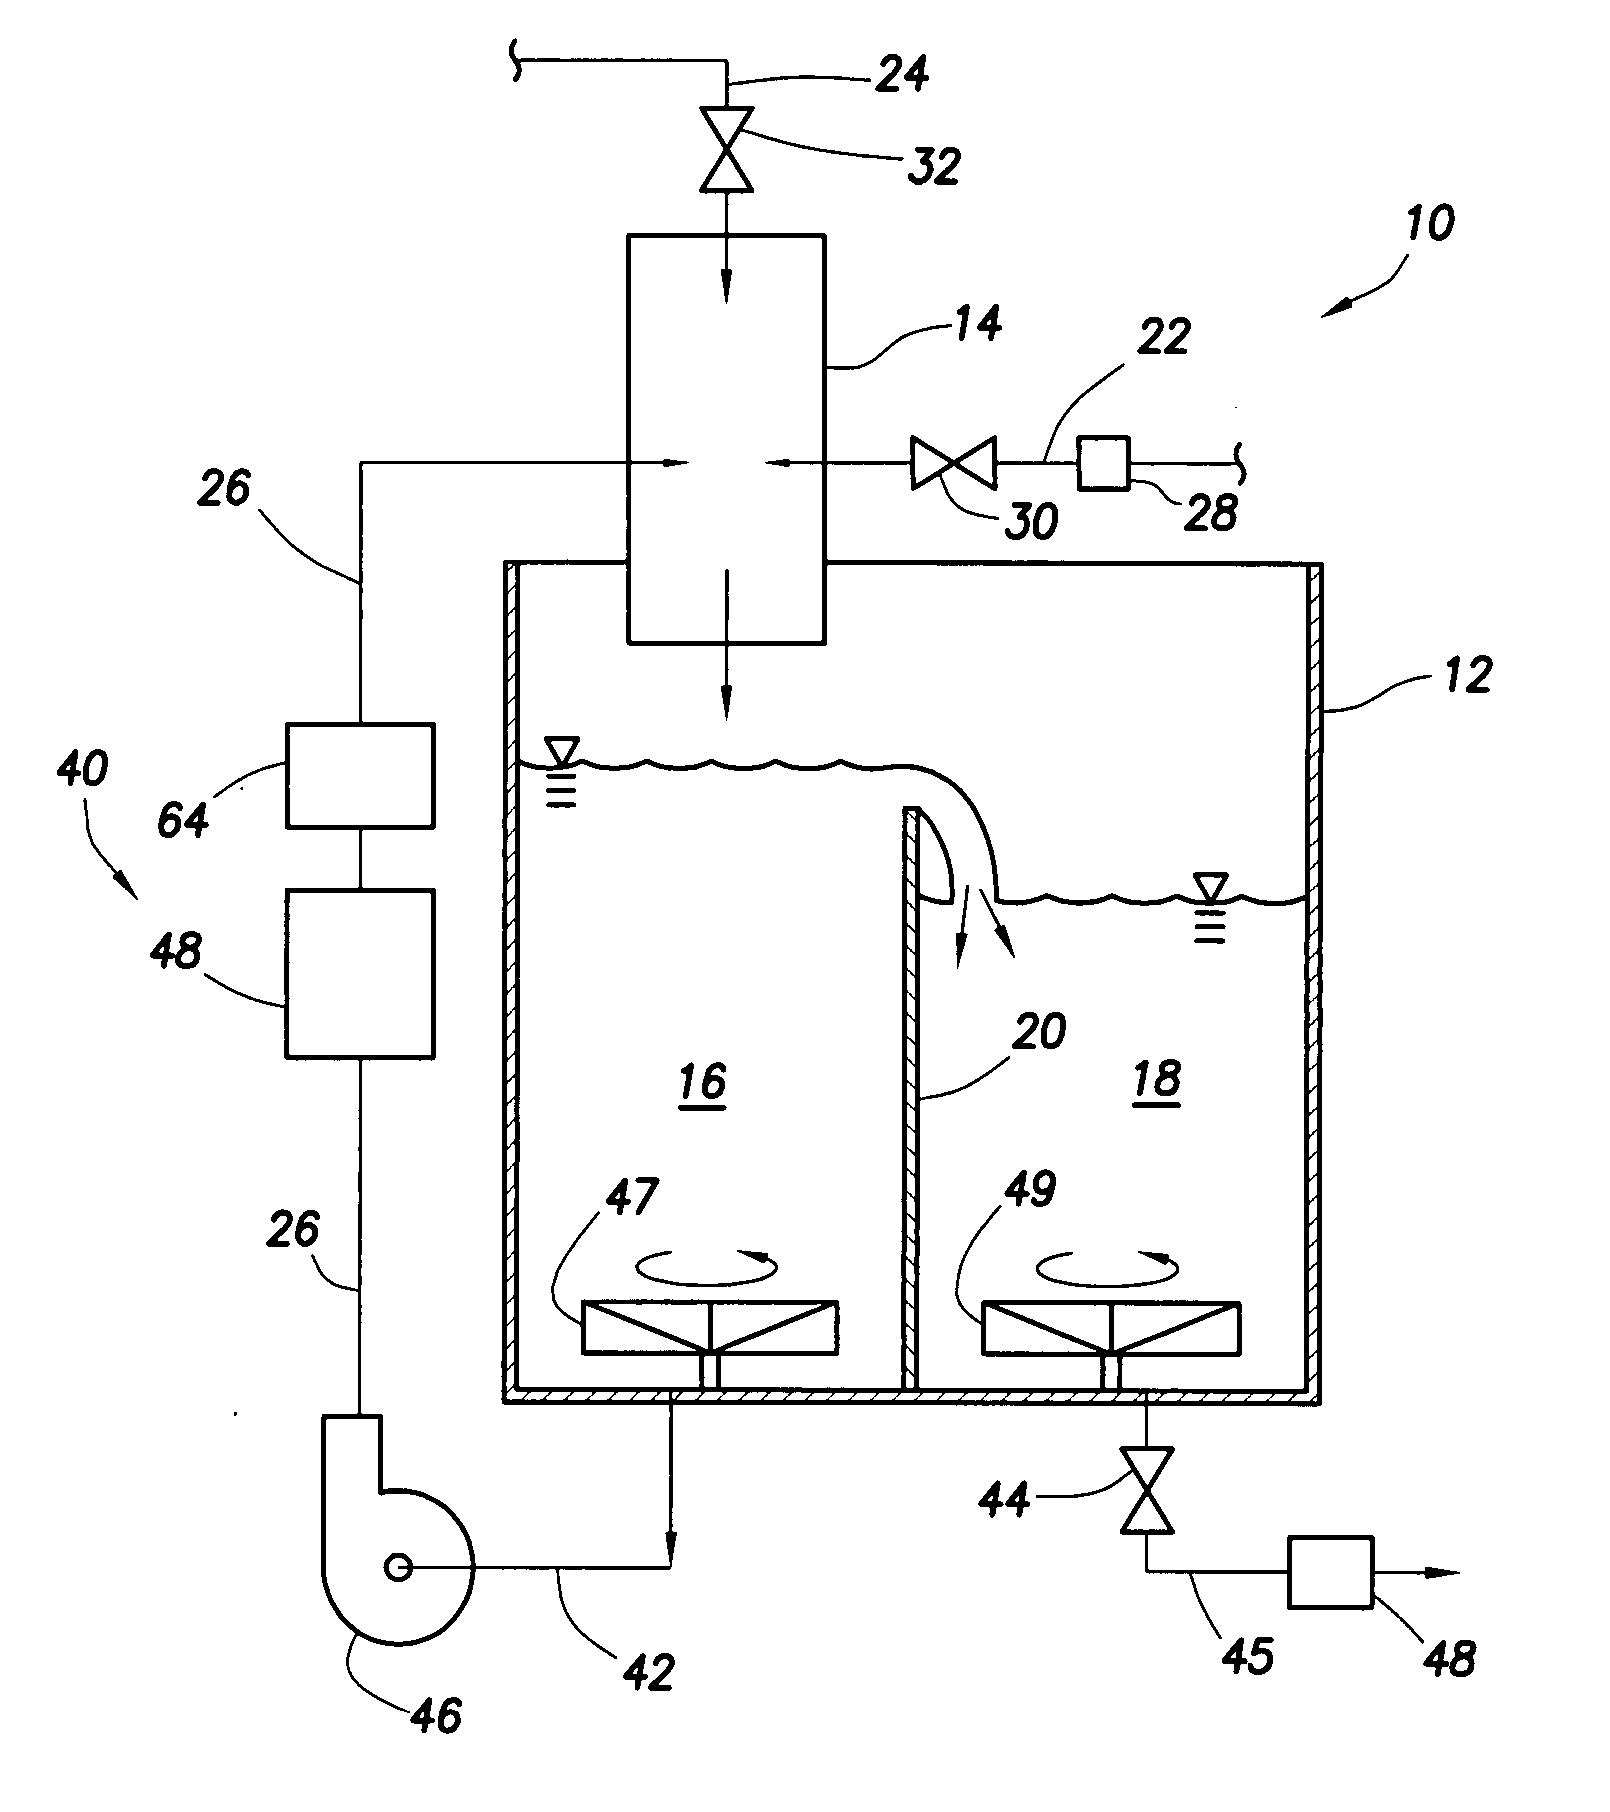 System and method for mixing water and non-aqueous materials using measured water concentration to control addition of ingredients